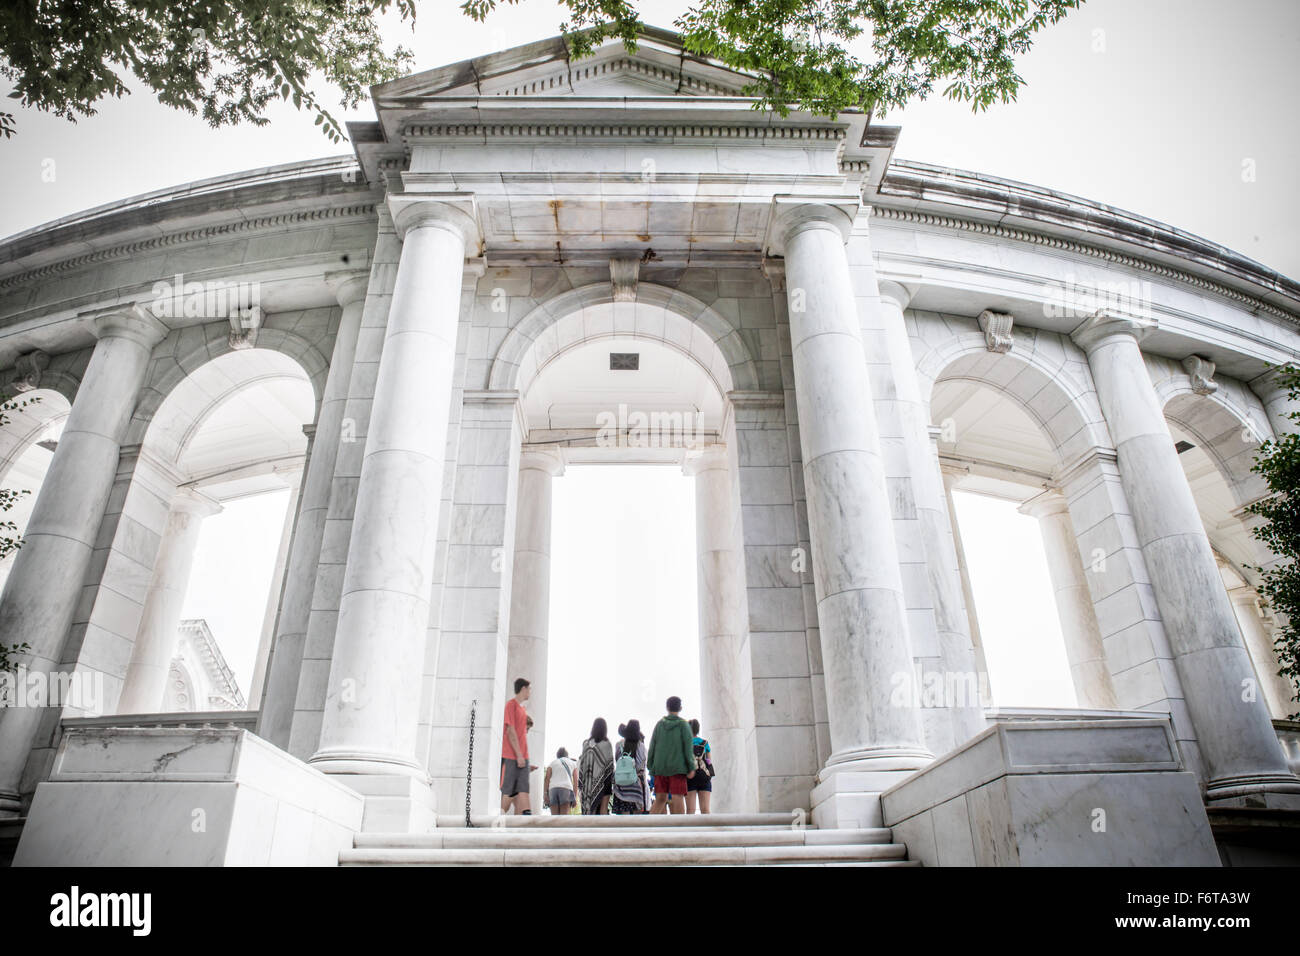 Pictured here is a view of the Memorial Amphitheater at Arlington National Cemetery with people visible, Stock Photo